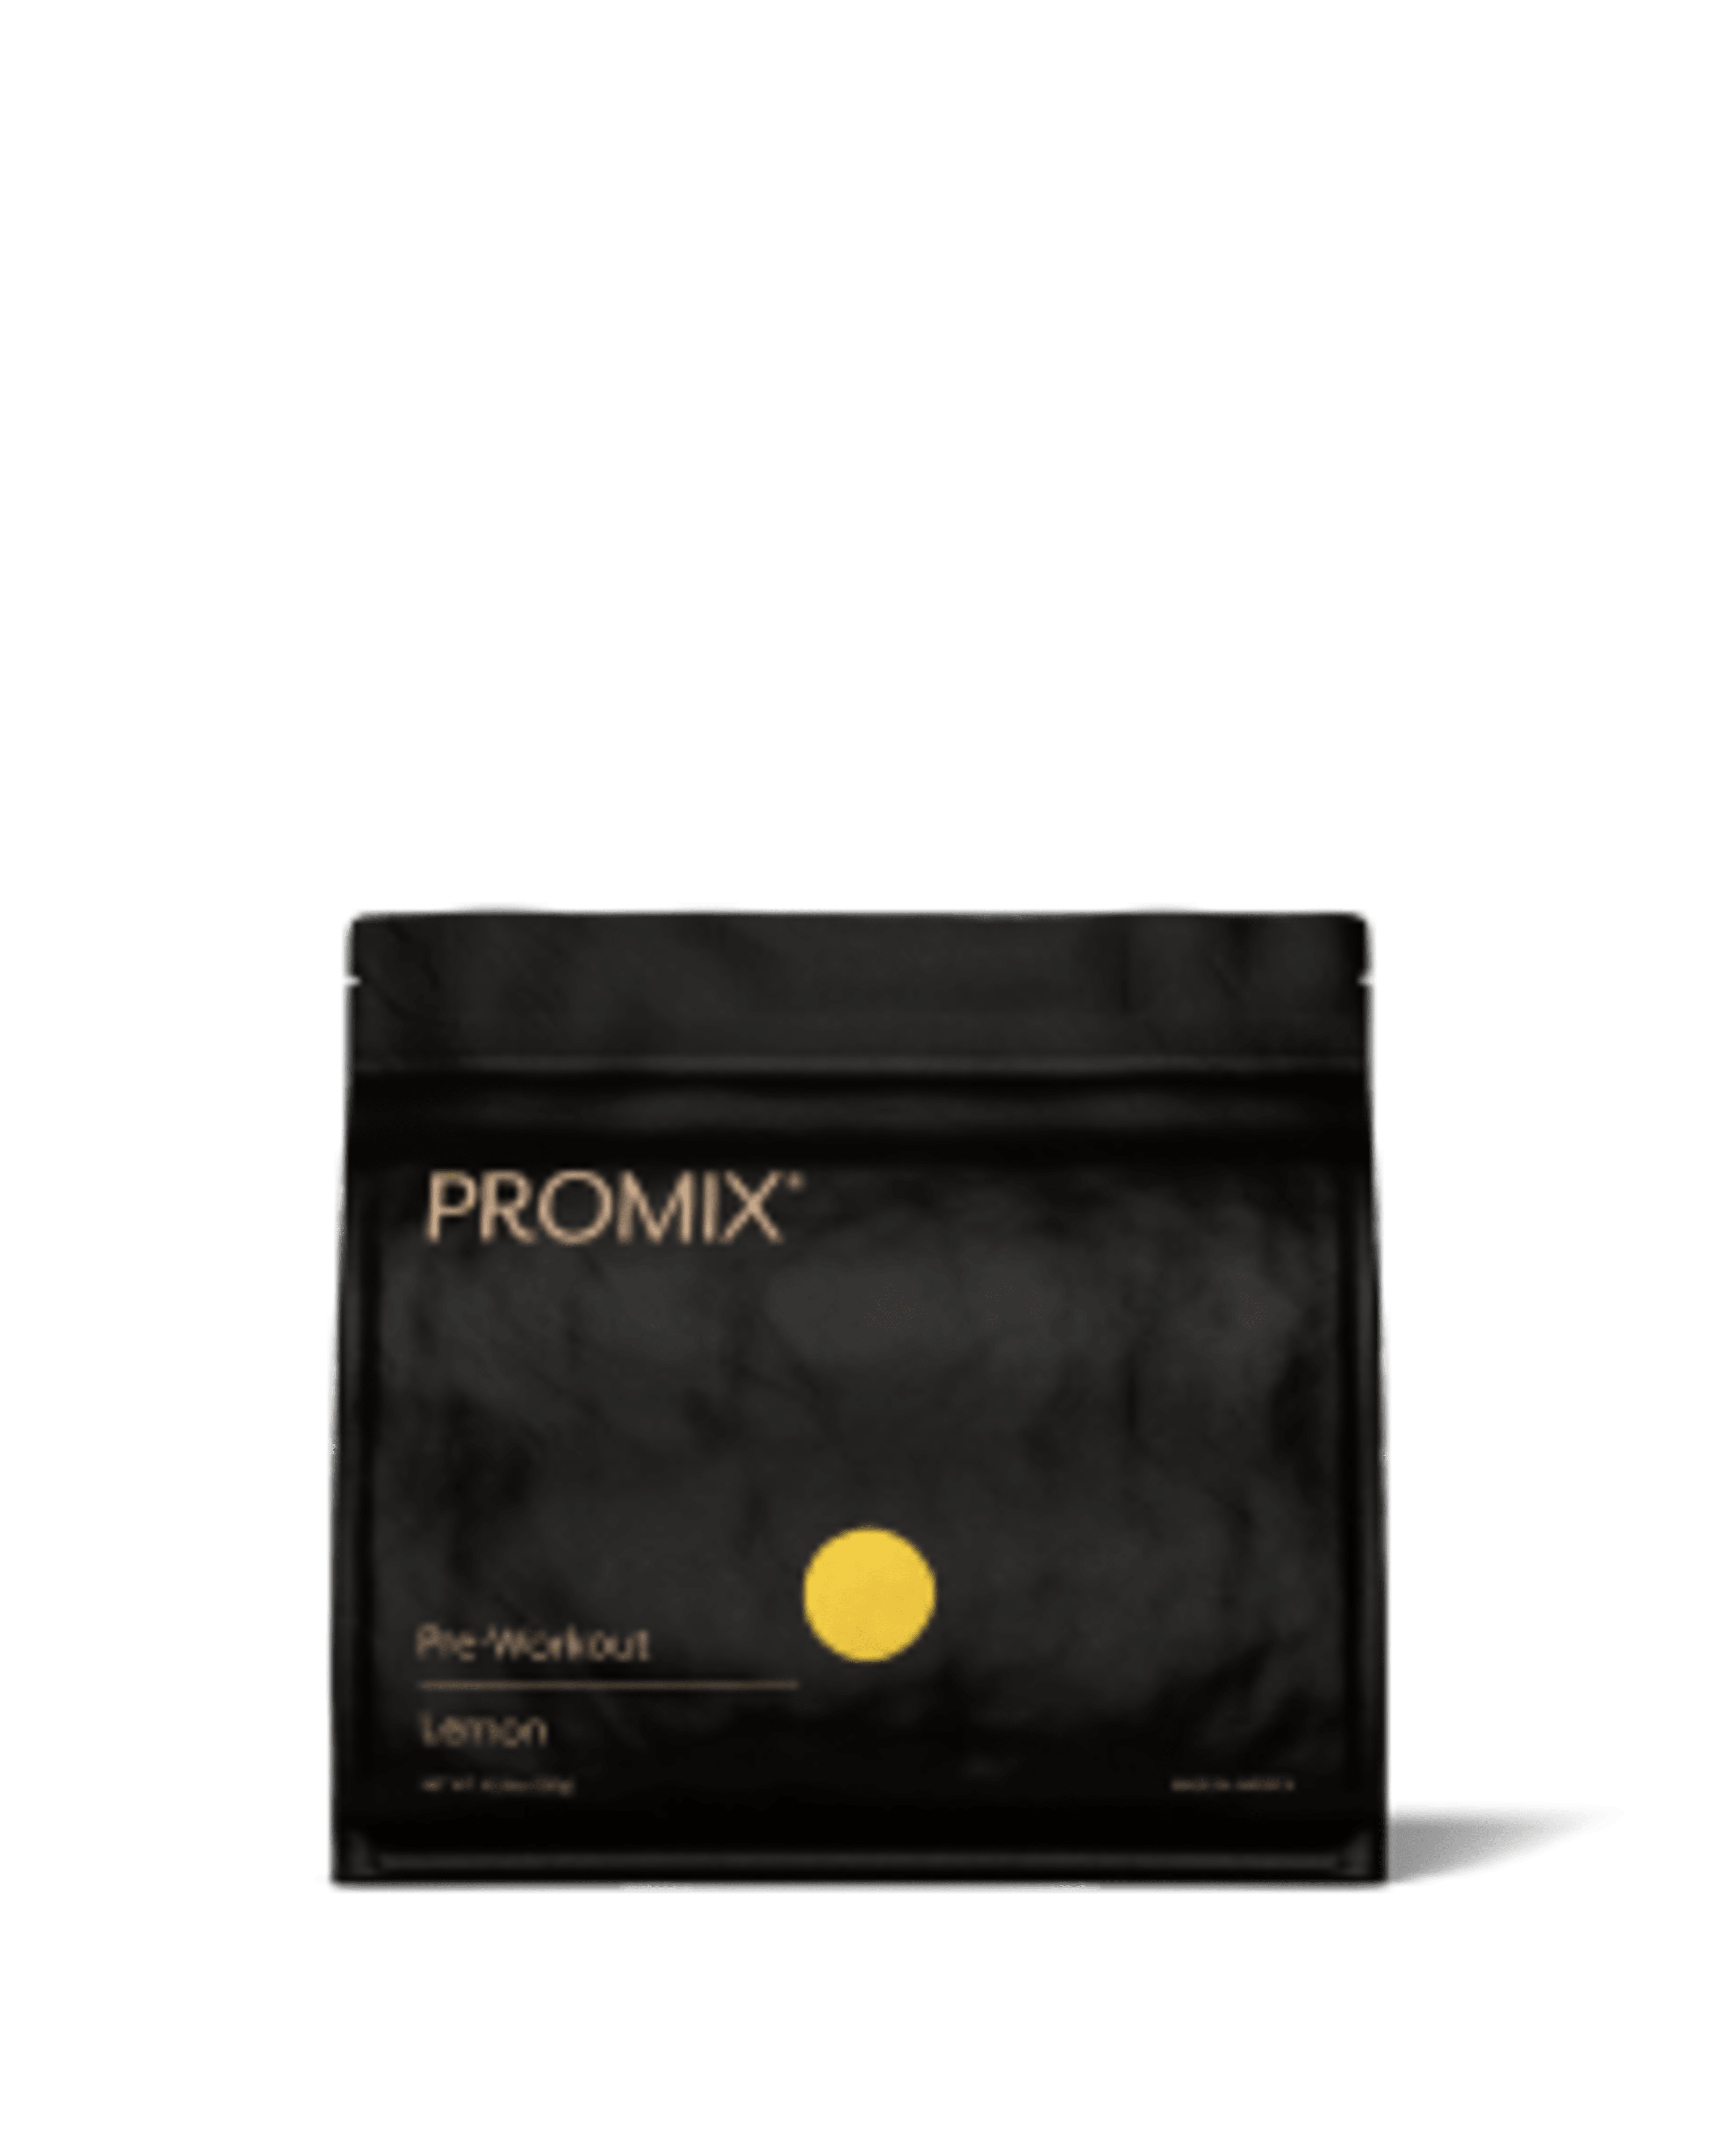 Promix NutritionCode